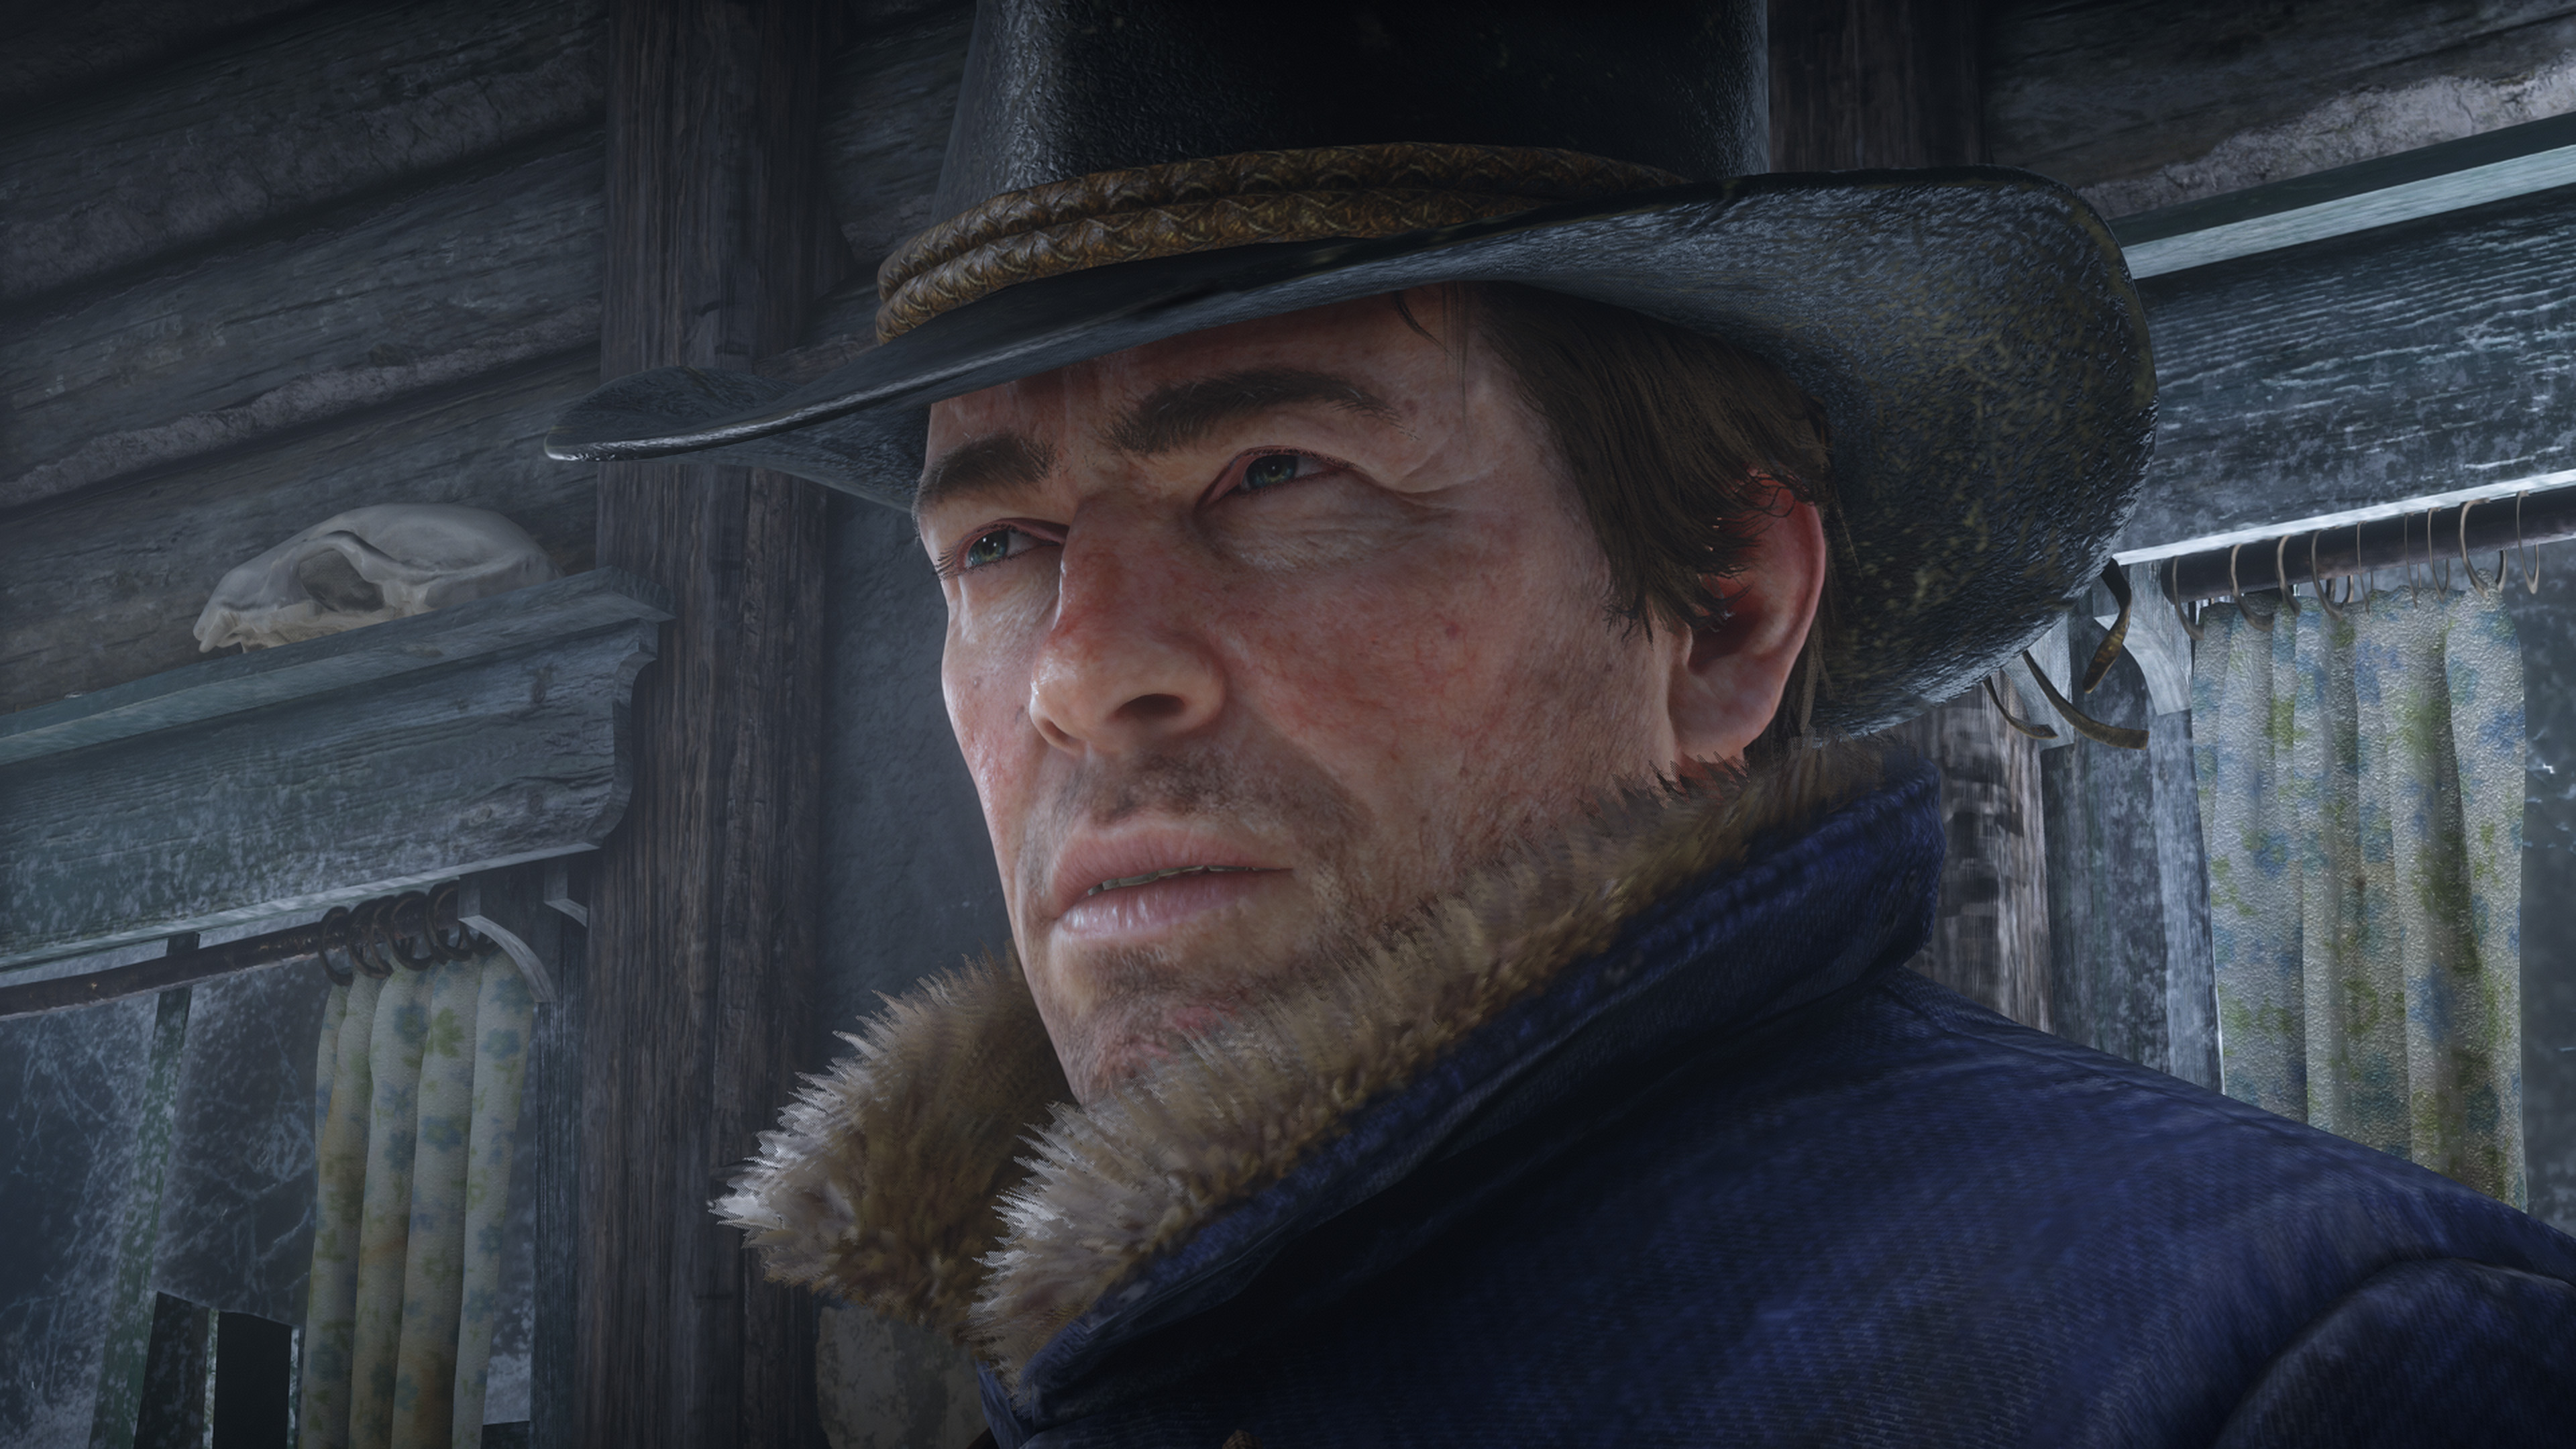 Red Dead Redemption 2's PC exclusive content and enhancements get detailed  - Neowin